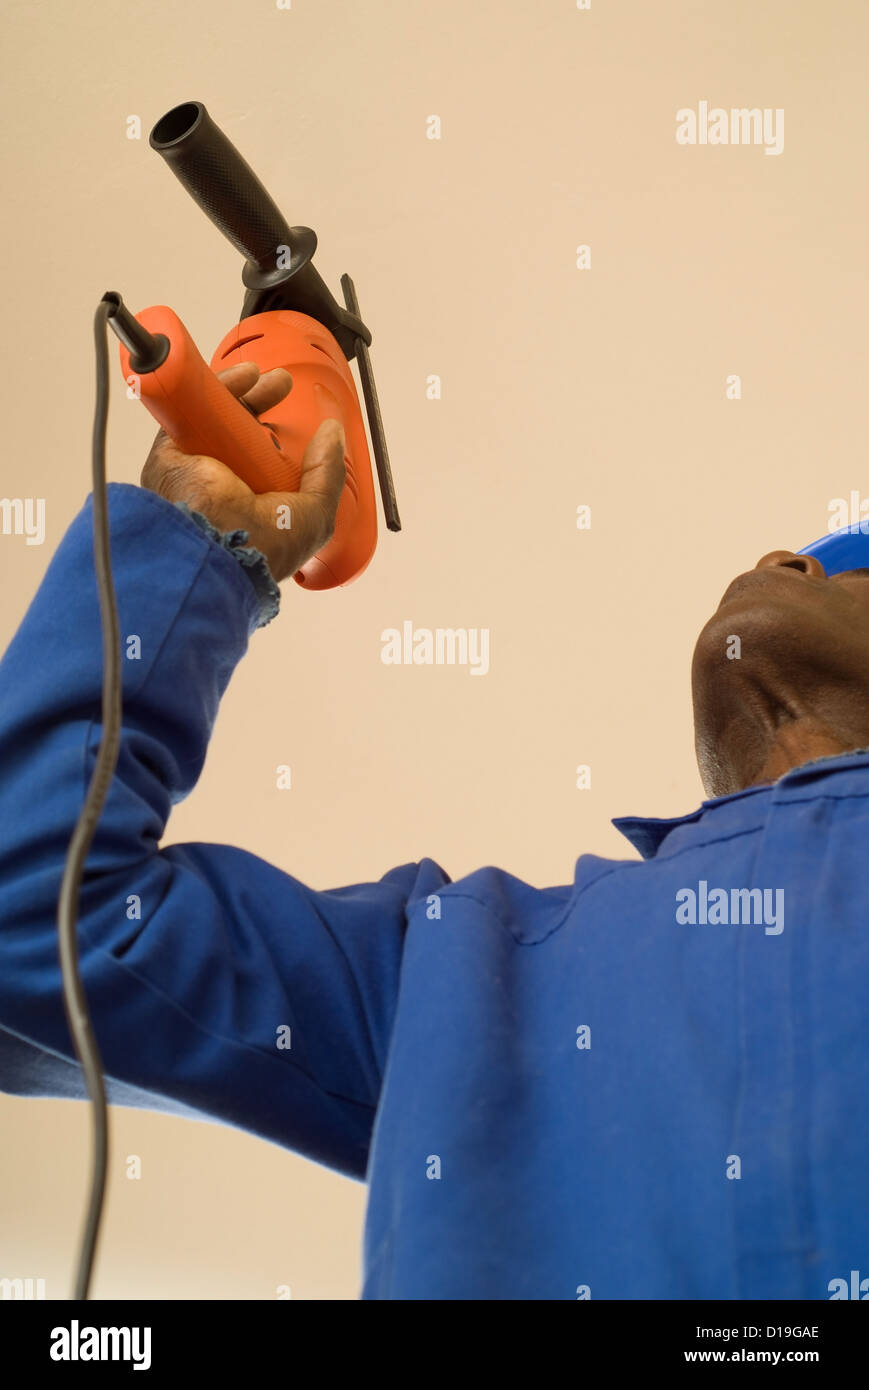 African American Construction Worker Handyman Carpenter Drilling With Electrical Power Tool